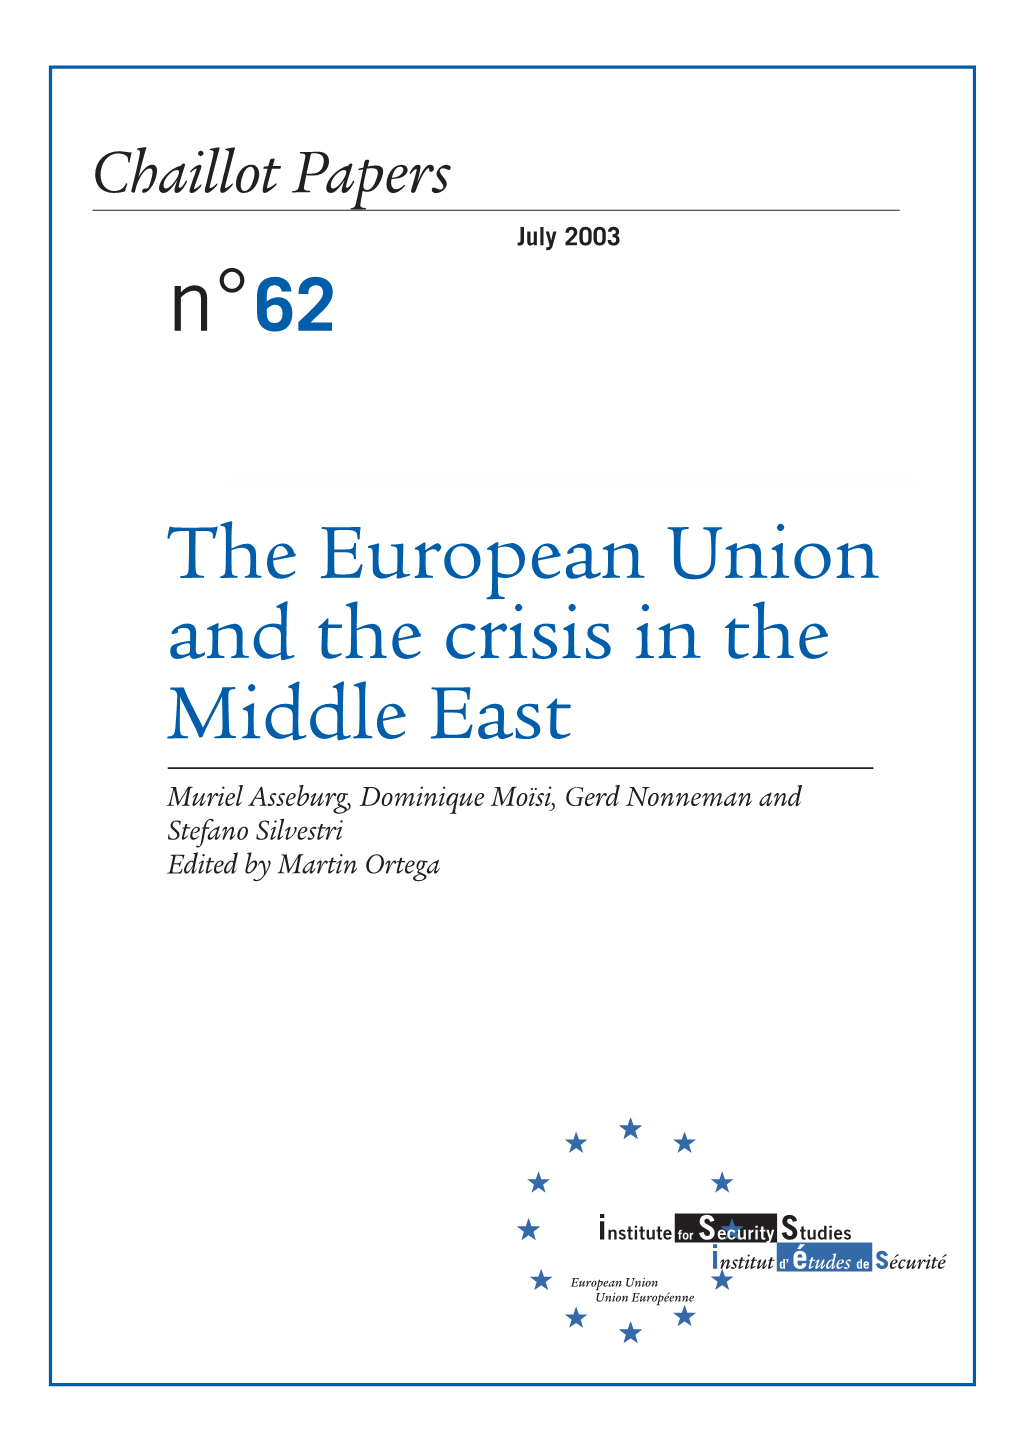 The European Union and the Crisis in the Middle East